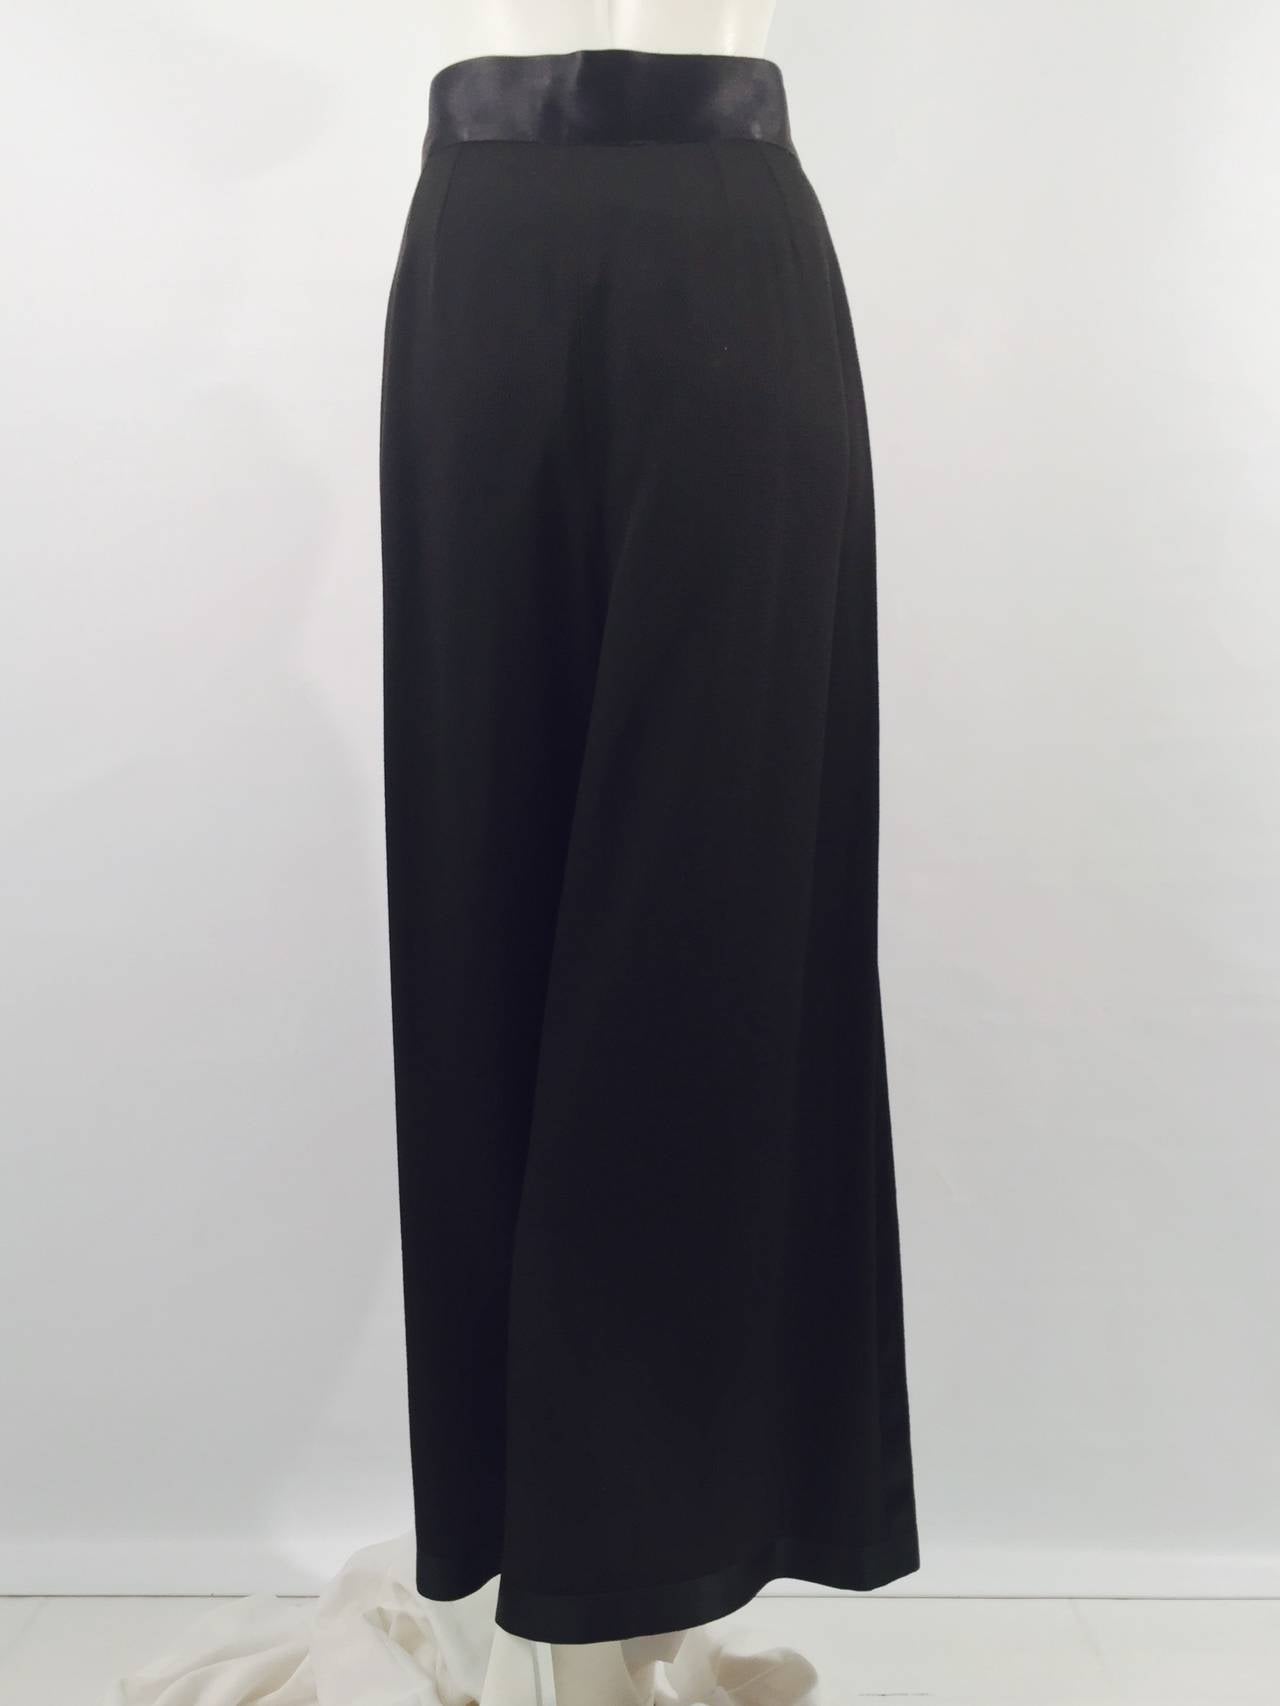 Chanel 1993 Spring Evening Palazzo Pants prove that Chanel is much more than the skirt suit!  Pleated, wide-leg pants feature satin waistband, piping, and hem.  Secured by side hidden zipper with two gold tone, signature double 